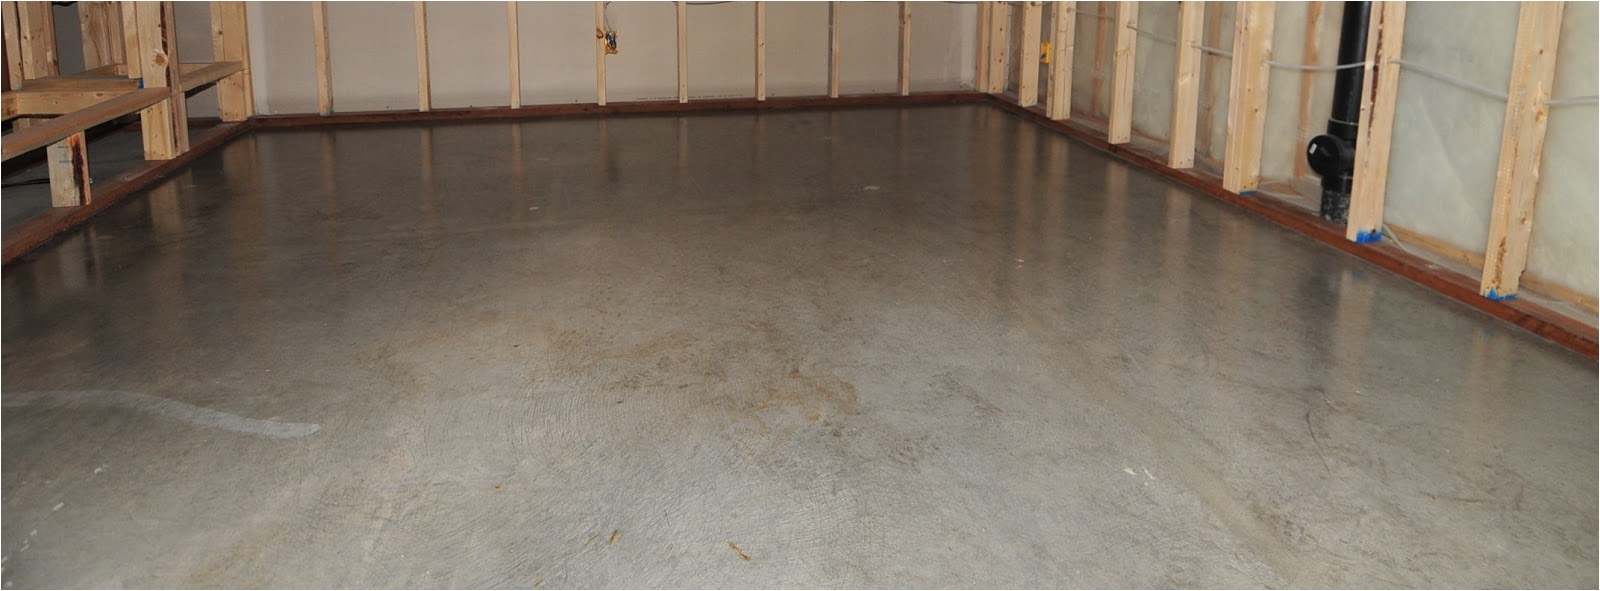 cool and modern basement concrete floors naturally achieved with non toxic eco friendly sealer and waxes